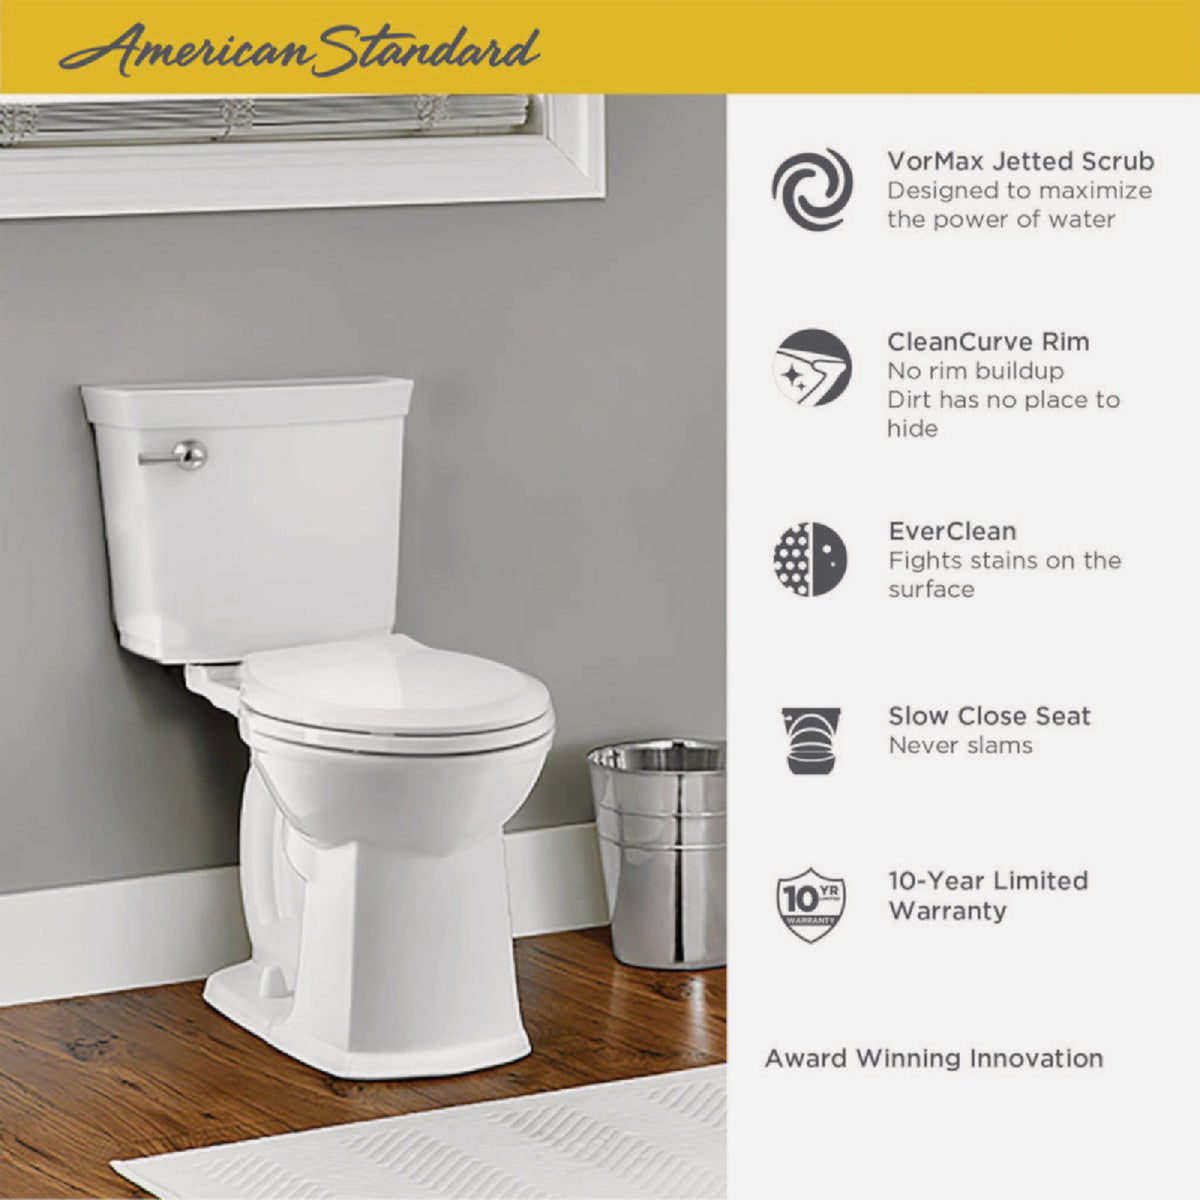 How To Replace A Toilet Seat With Hidden Bolts American Standard - Allied  Plumbing & Heating Supply Co.